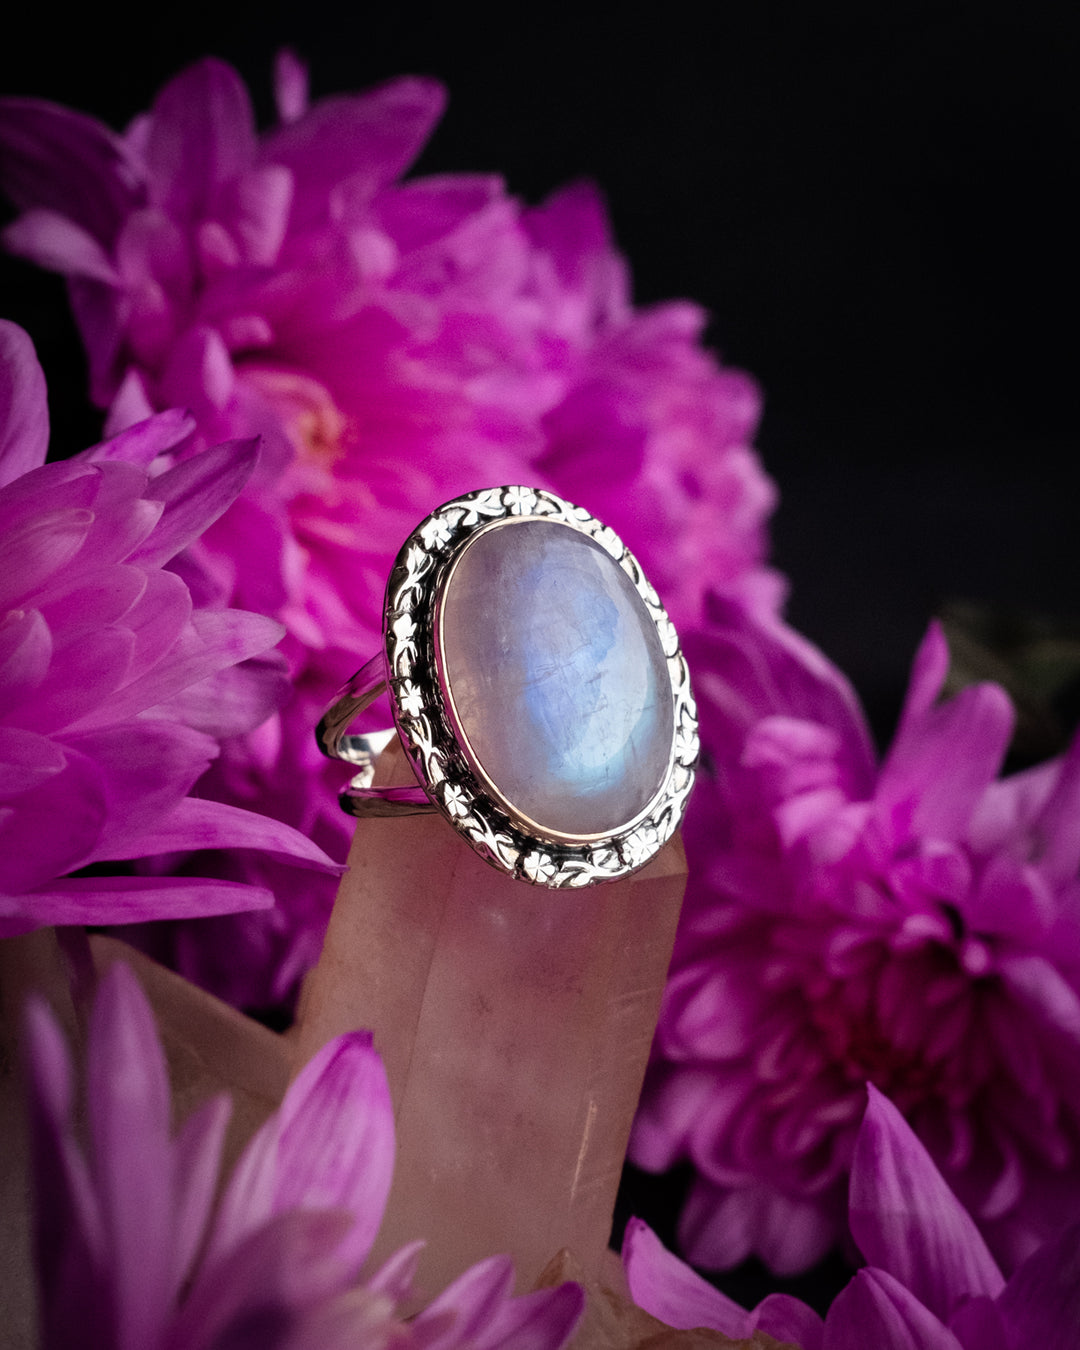 Pink Moonstone Oval Ring in Sterling Silver - Size 9 US / R 3/4 UK - The Healing Pear